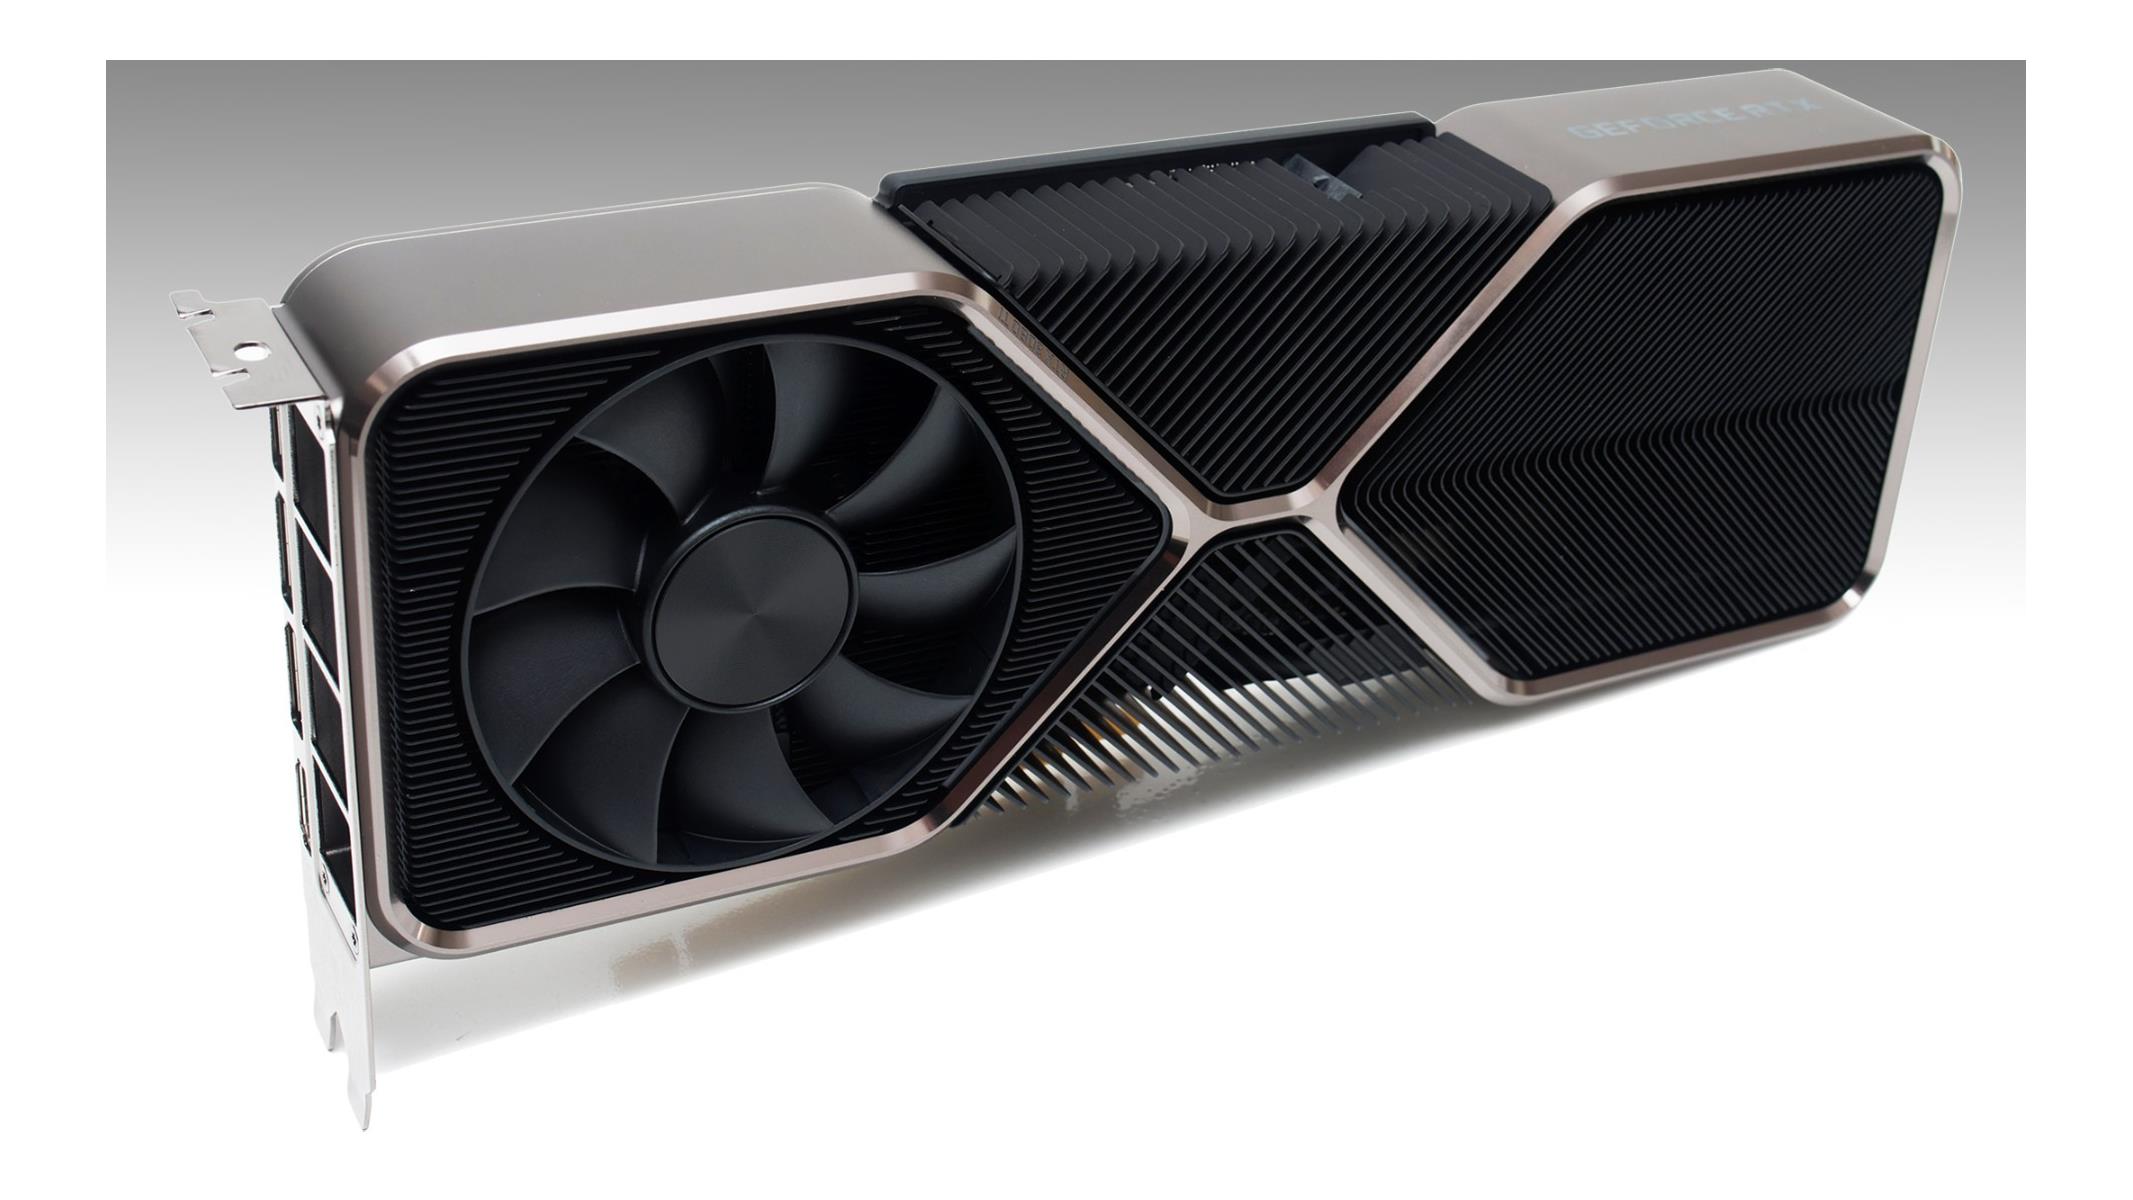 Nvidia GeForce RTX 3080 review